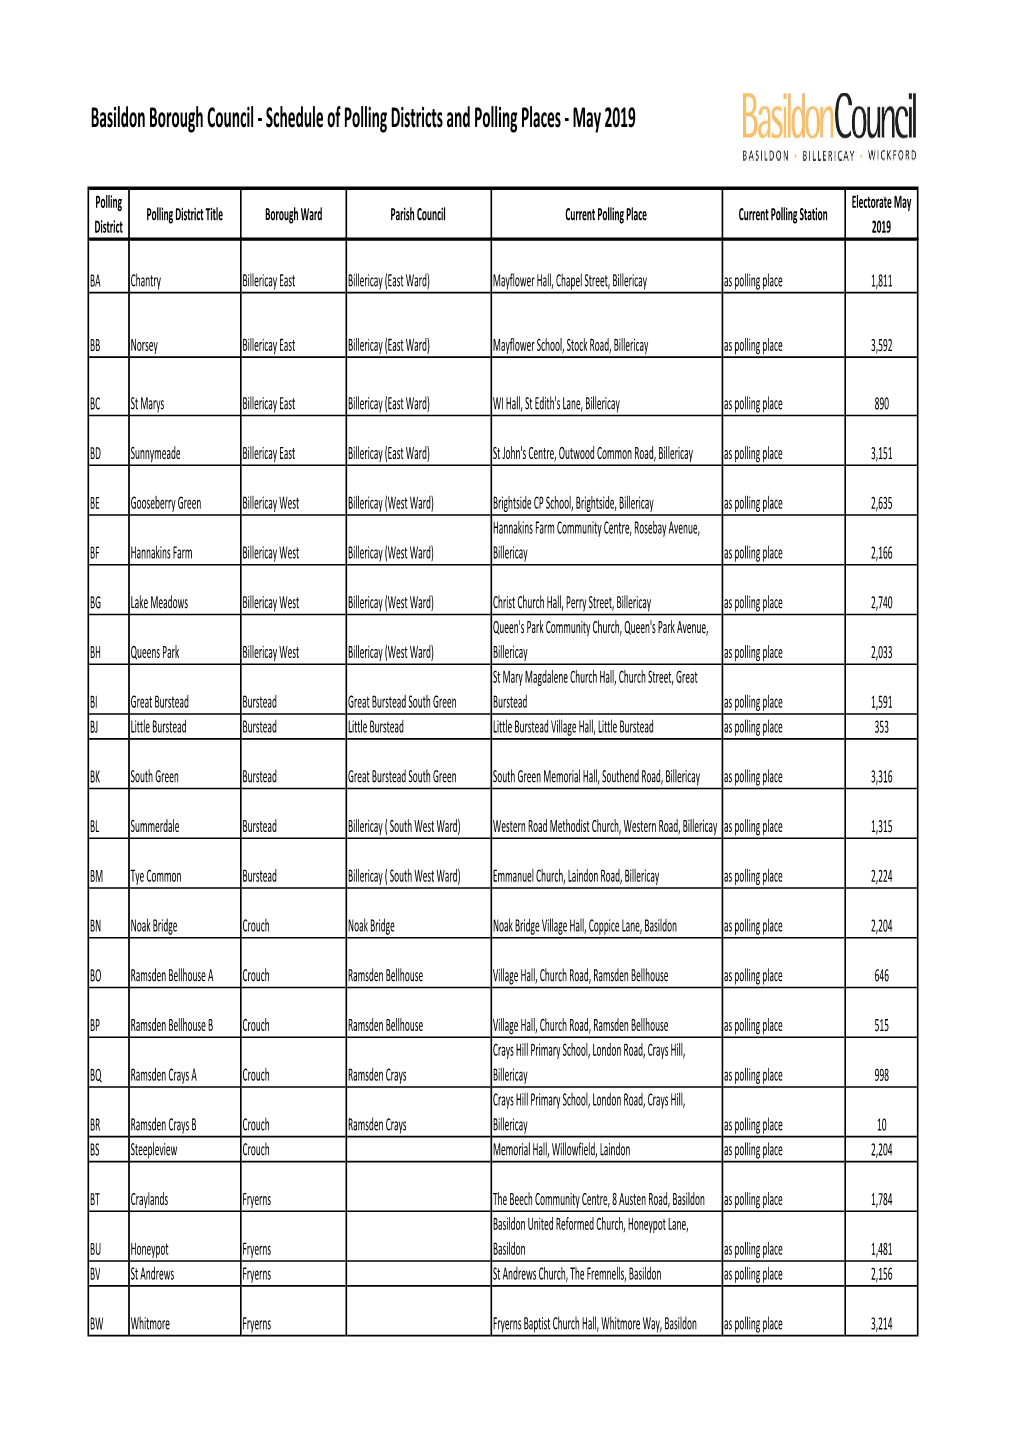 Schedule of Polling Districts and Polling Places - May 2019